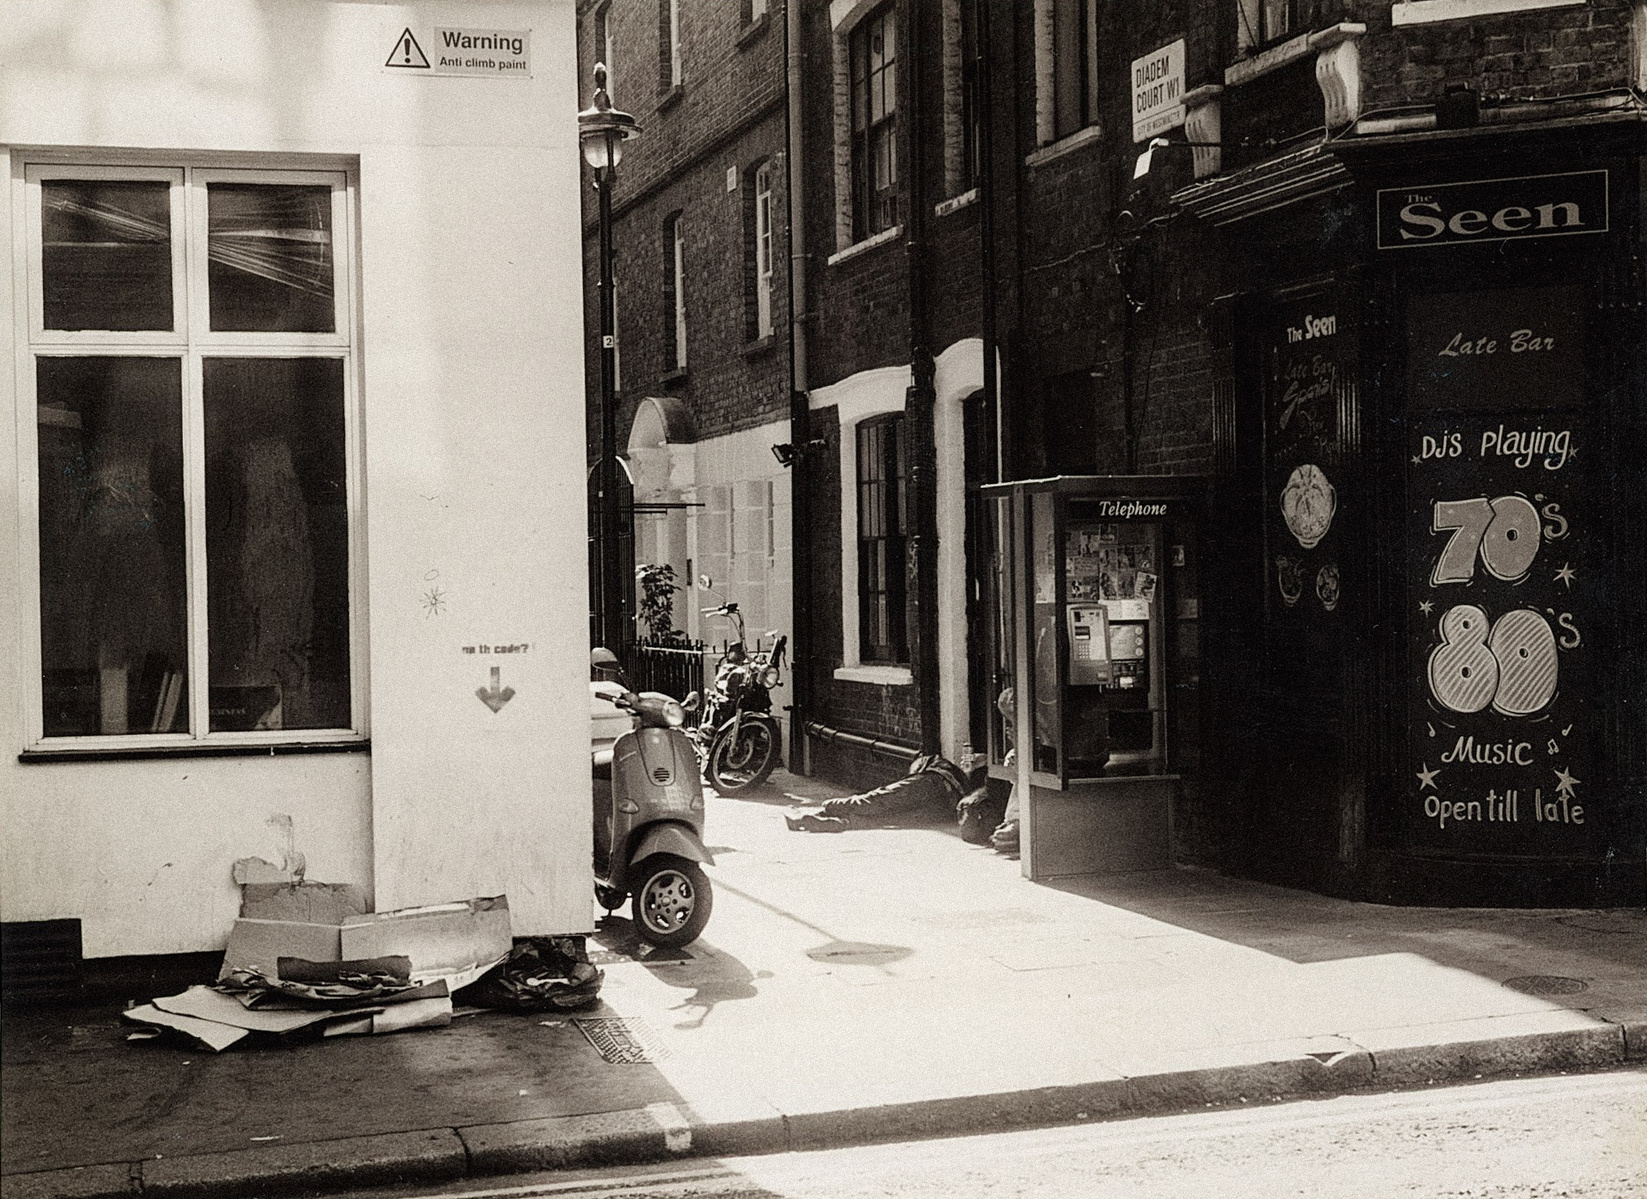 A black and white image of a homeless man asleep behind Tottenham Court Road Station in August 2001.